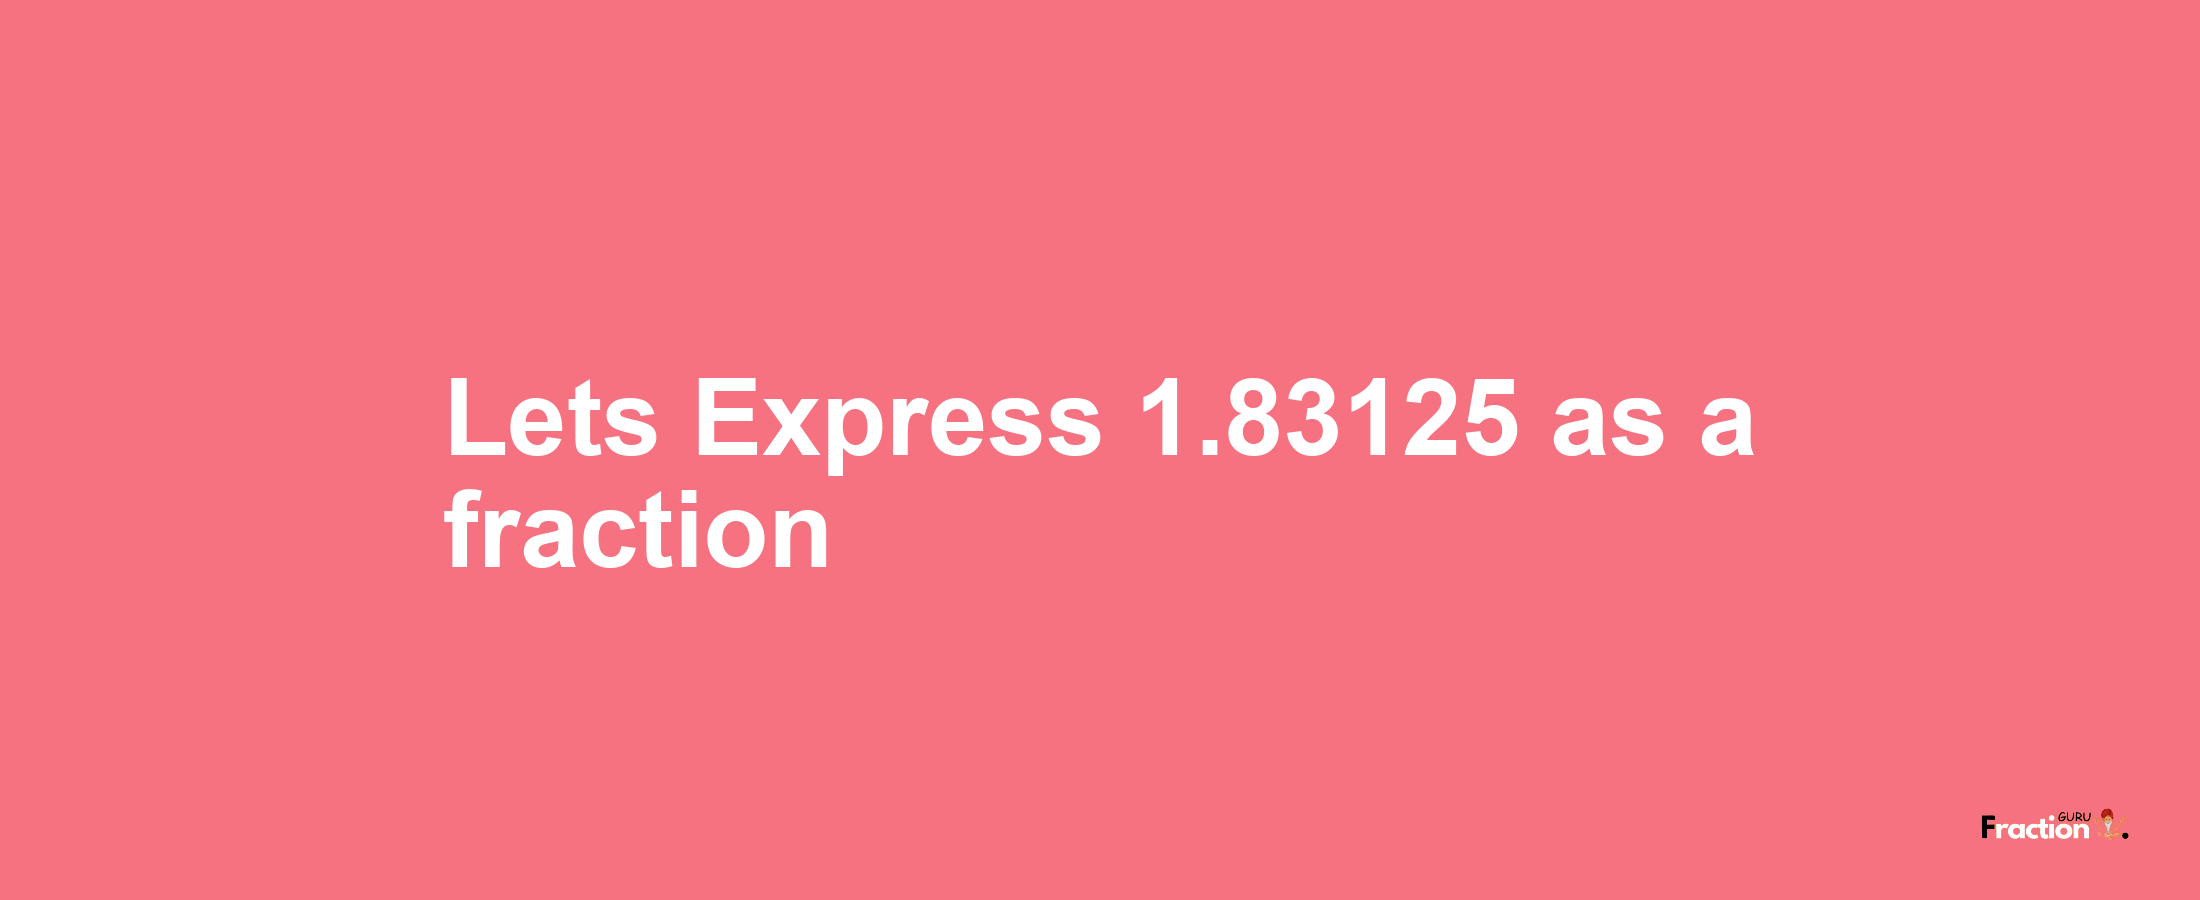 Lets Express 1.83125 as afraction